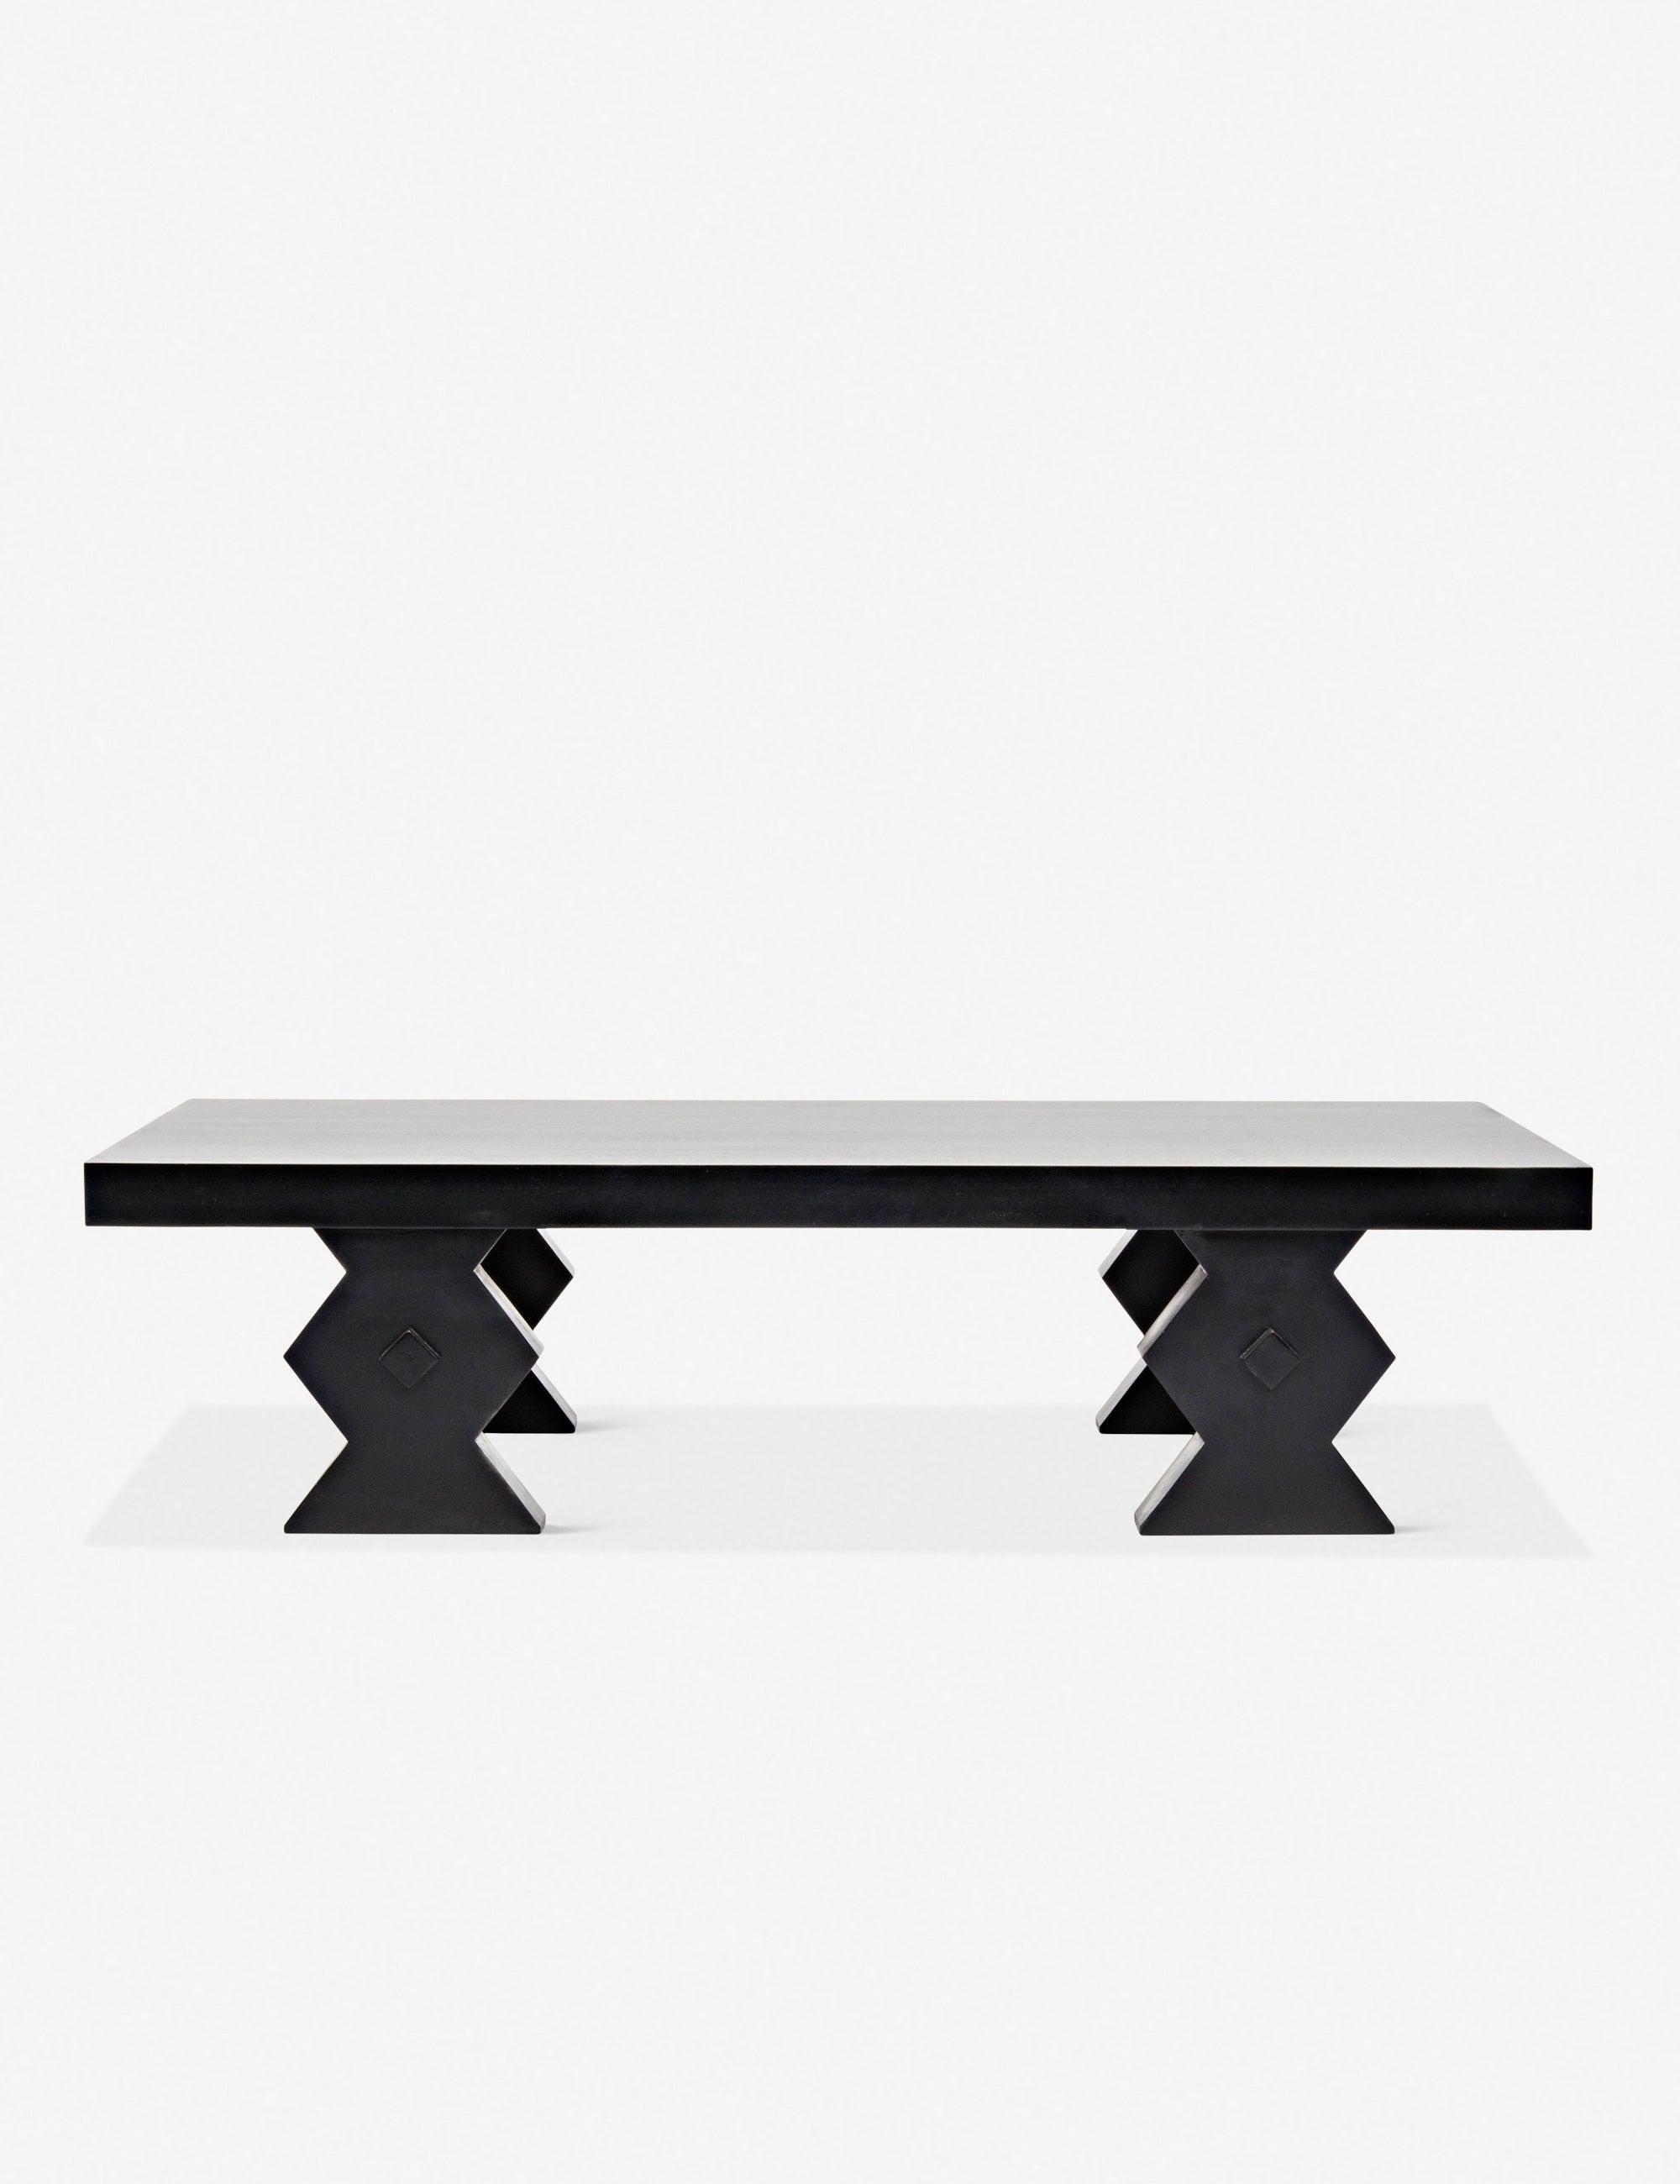 Masaro Hand-Carved Mahogany 38'' Coffee Table in Hand-Rubbed Black